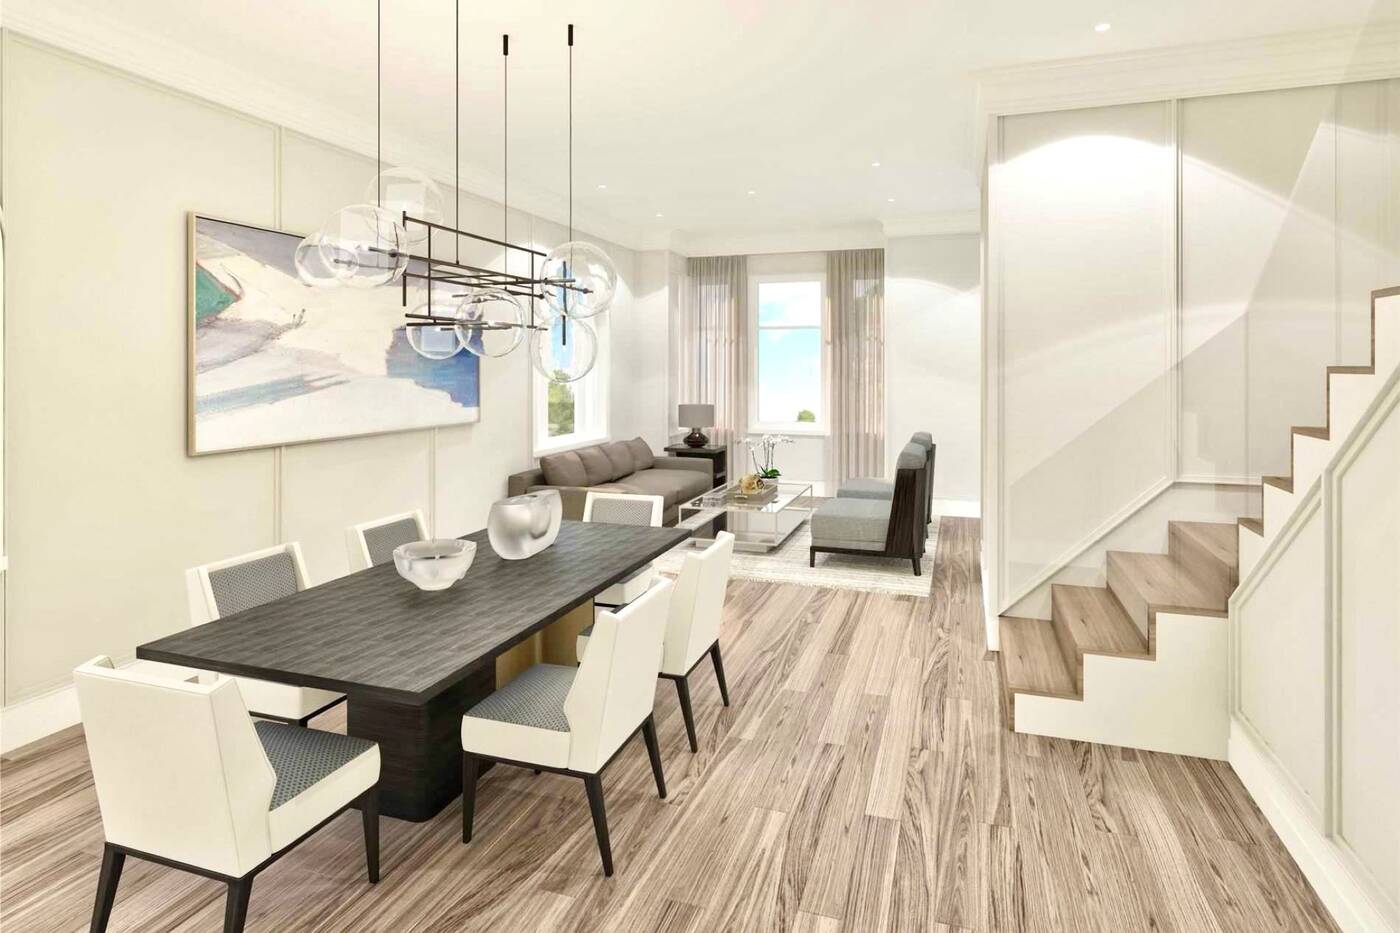 High ceilings and open floor layouts at the Konzulat Town residences